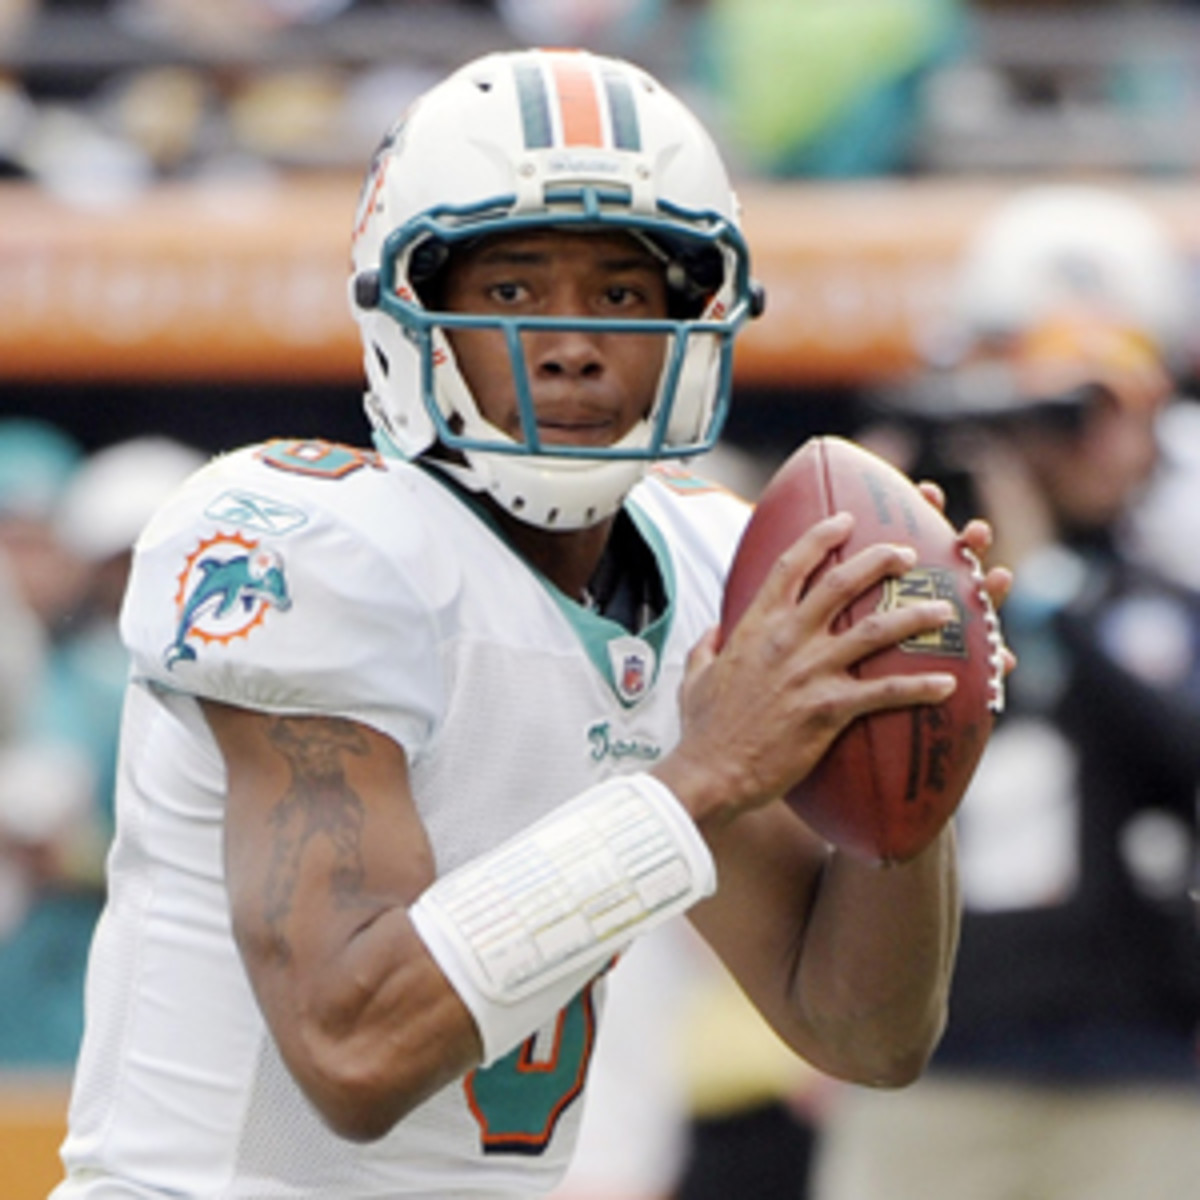 Pat White has not played in the NFL since his 2009 rookie season with the Dolphins.(Ronald C. Modra/Getty Images)